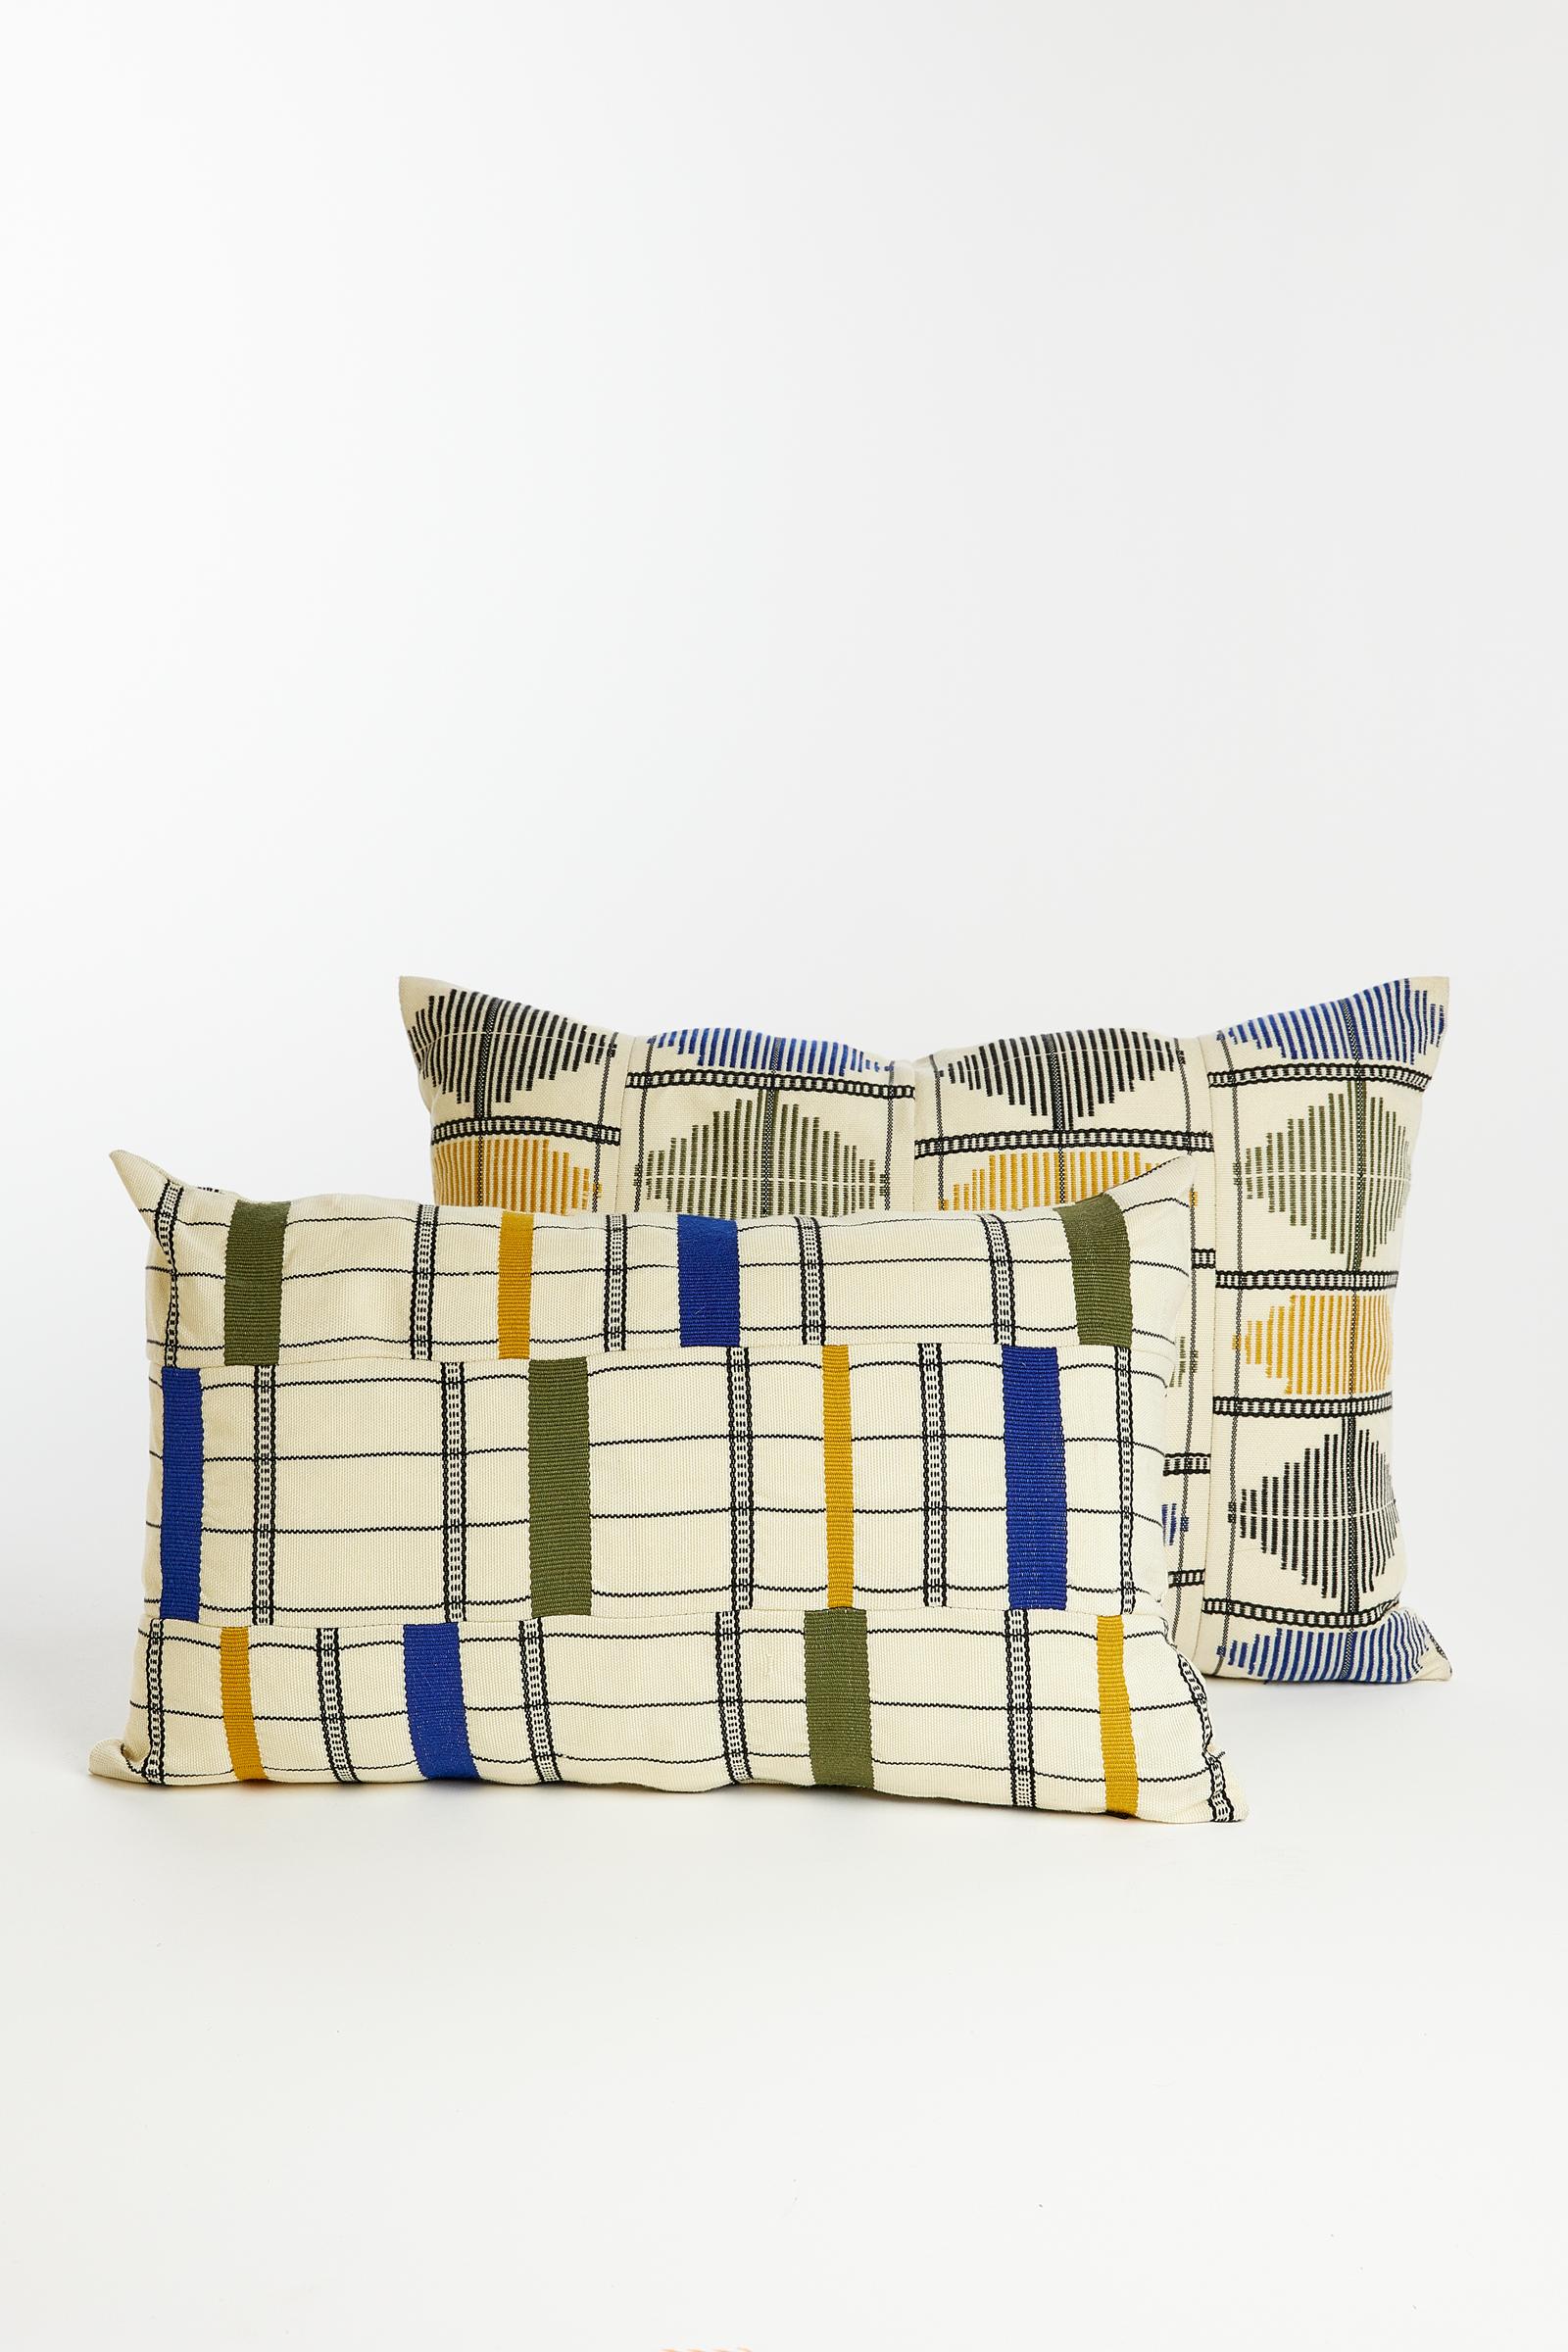 Woven Kente cushion Rhythmic: 
Beautifully Striped
Colours: Herb Indigo

One of our favourite repeat patterns is stripes, what is yours? This luxury geometric hand-woven cushion is woven with two opposing stripes, vertical and horizontal. The